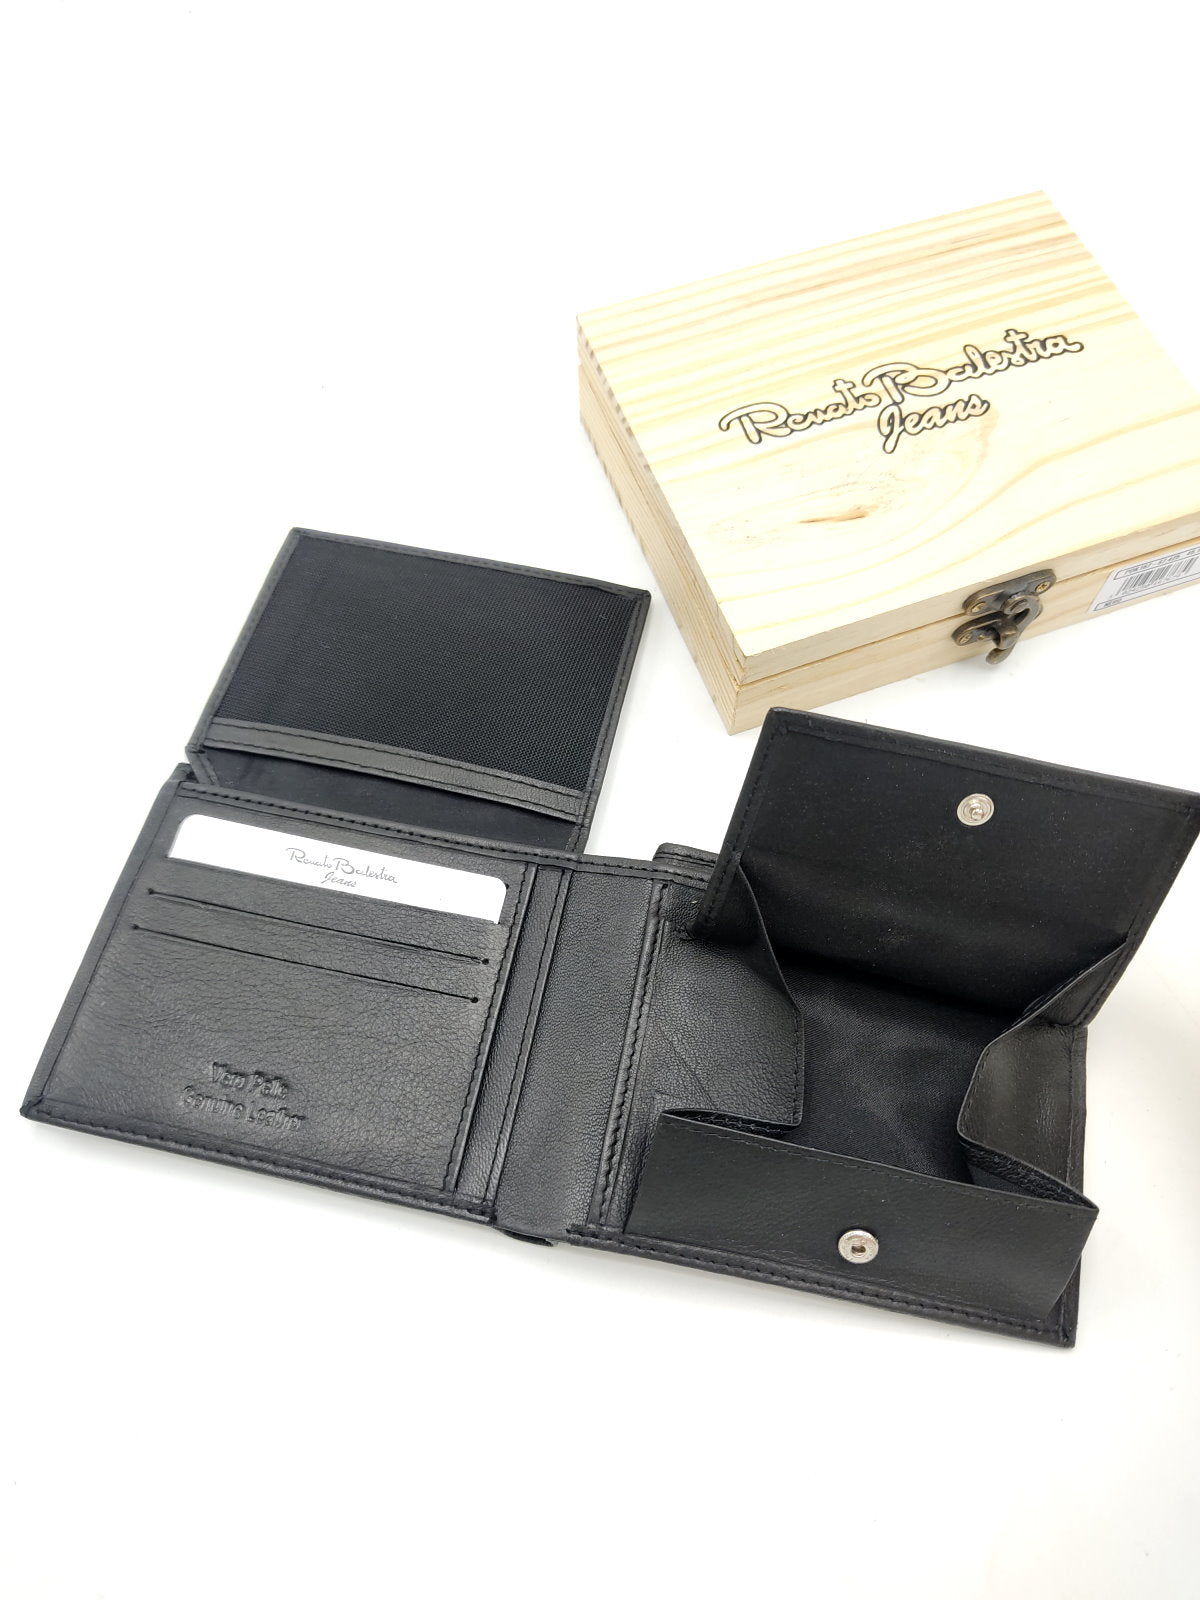 Genuine leather wallet for Men, Brand Renato Balestra Jeans, with wooden box, art. PDK167-67.425